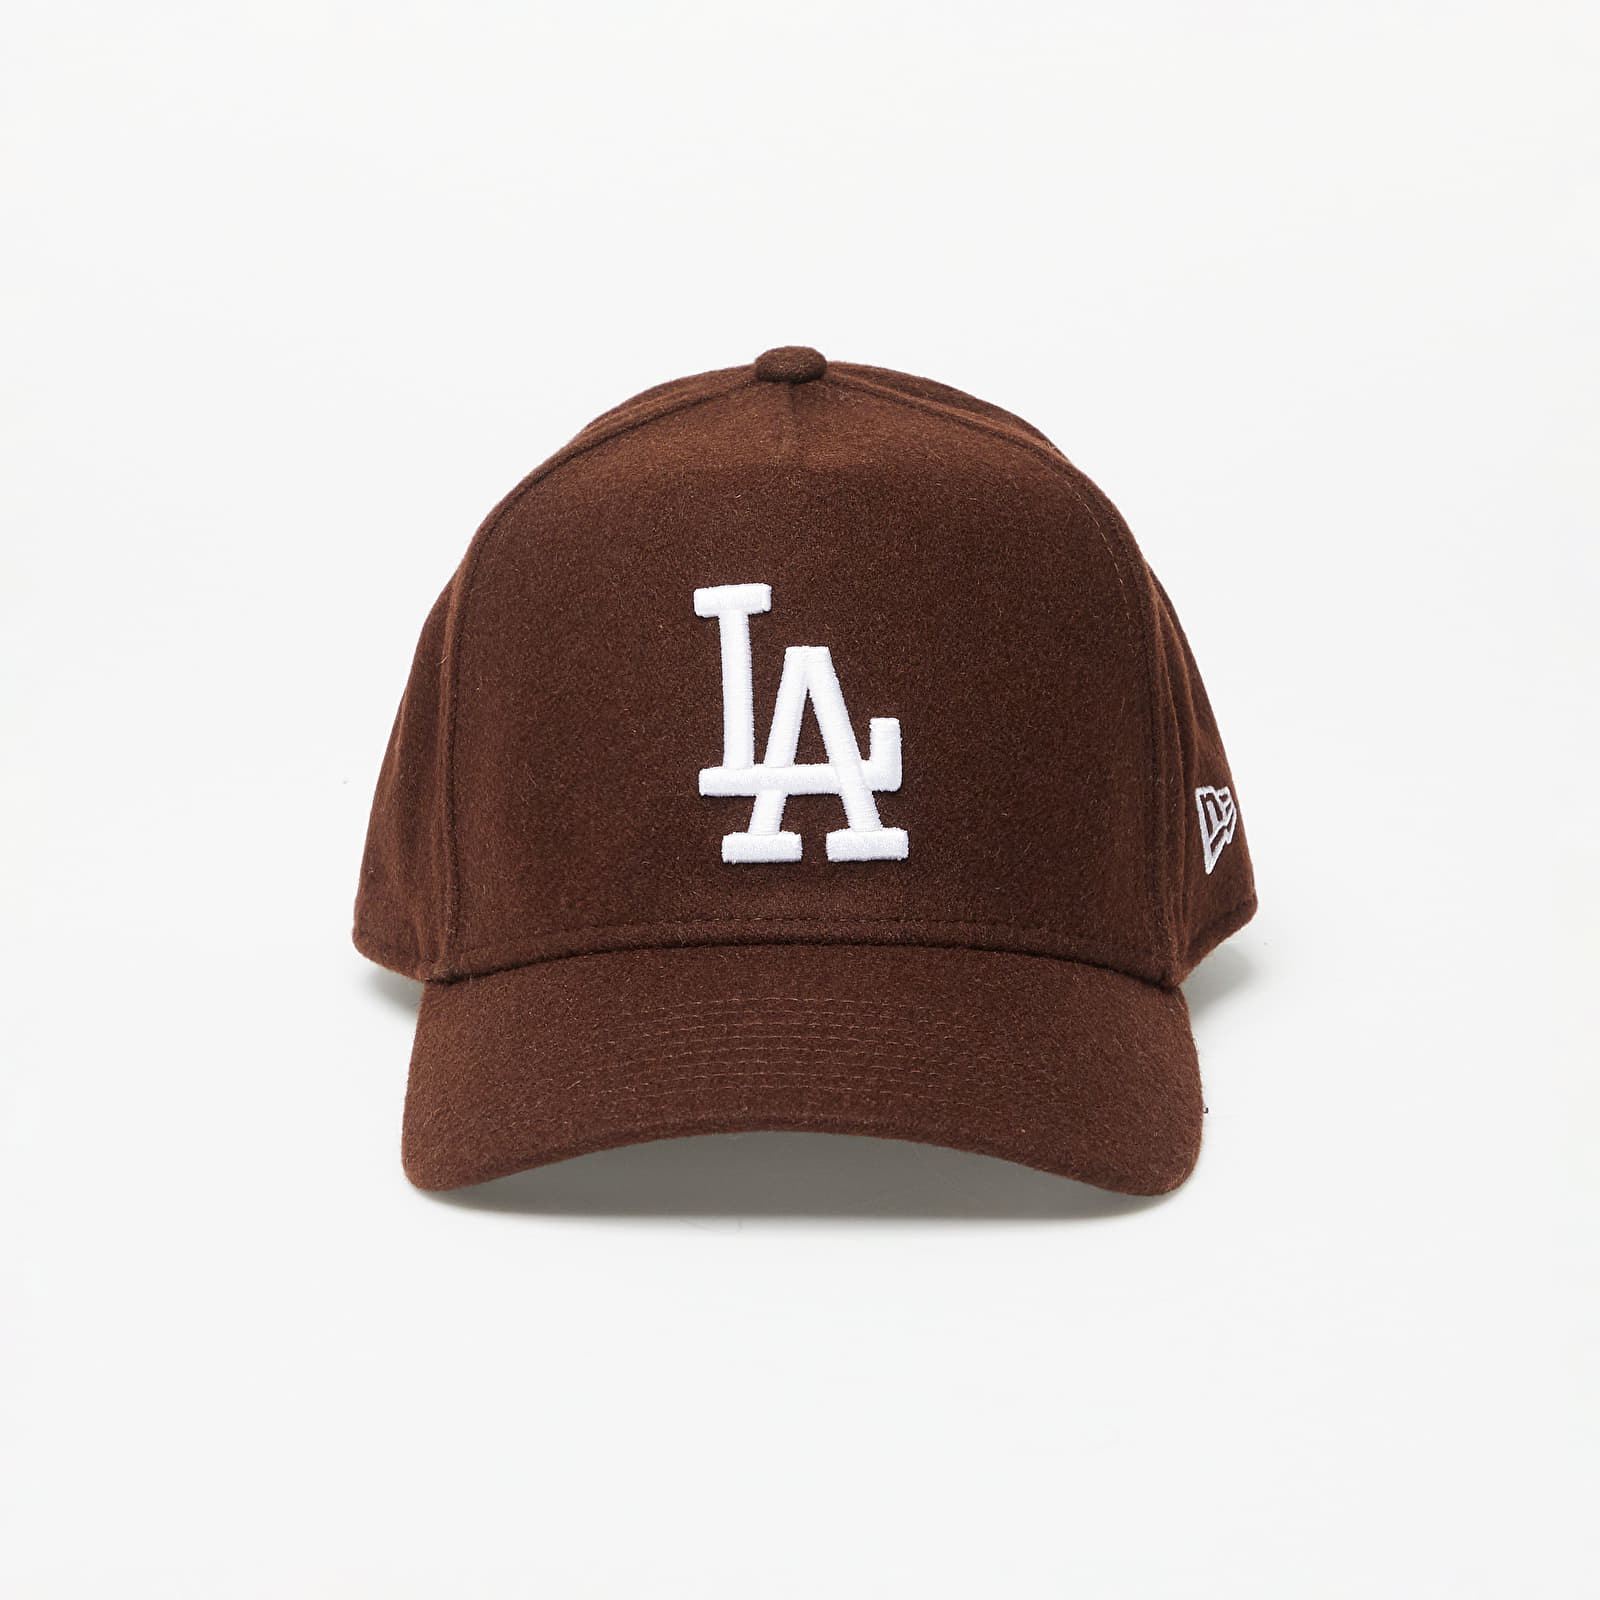 Casquettes New Era Los Angeles Dodgers Melton Wool A-Frame Trucker Cap Nfl Brown Suede/ White